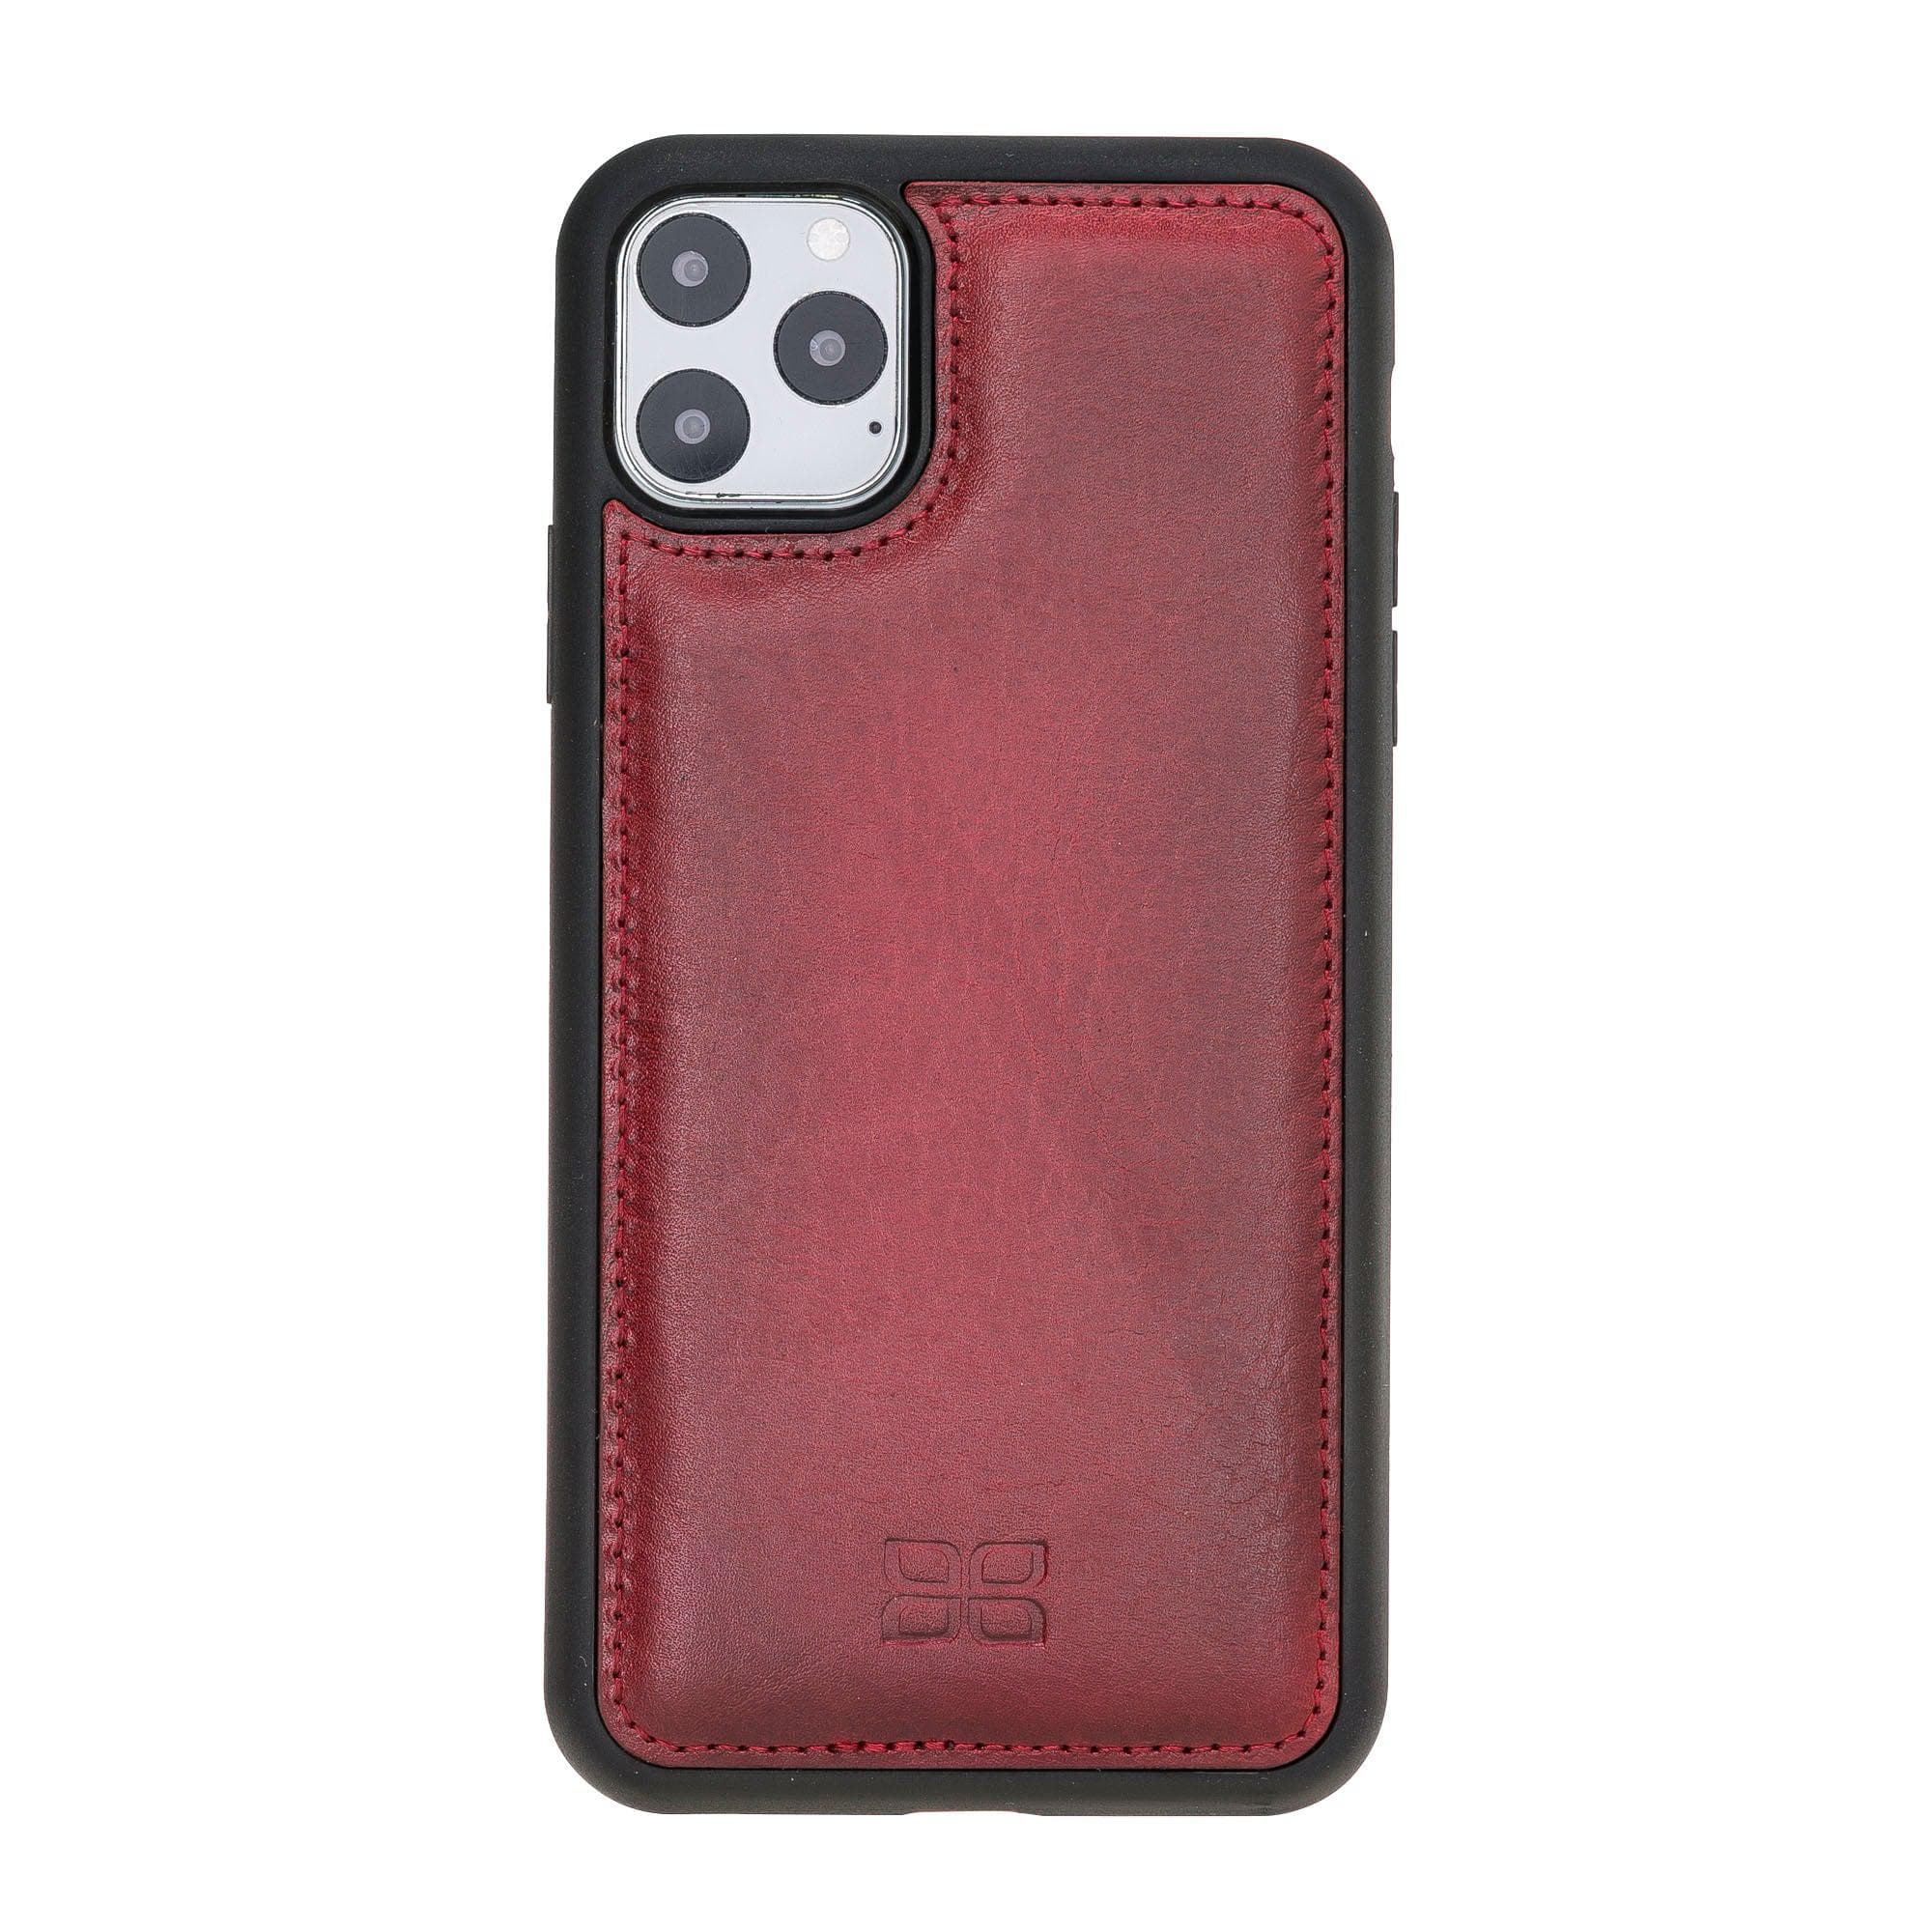 Flex Cover Leather Back Cover Case for Apple iPhone 11 Series iPhone 11 Promax 6.5" / Red Bouletta LTD